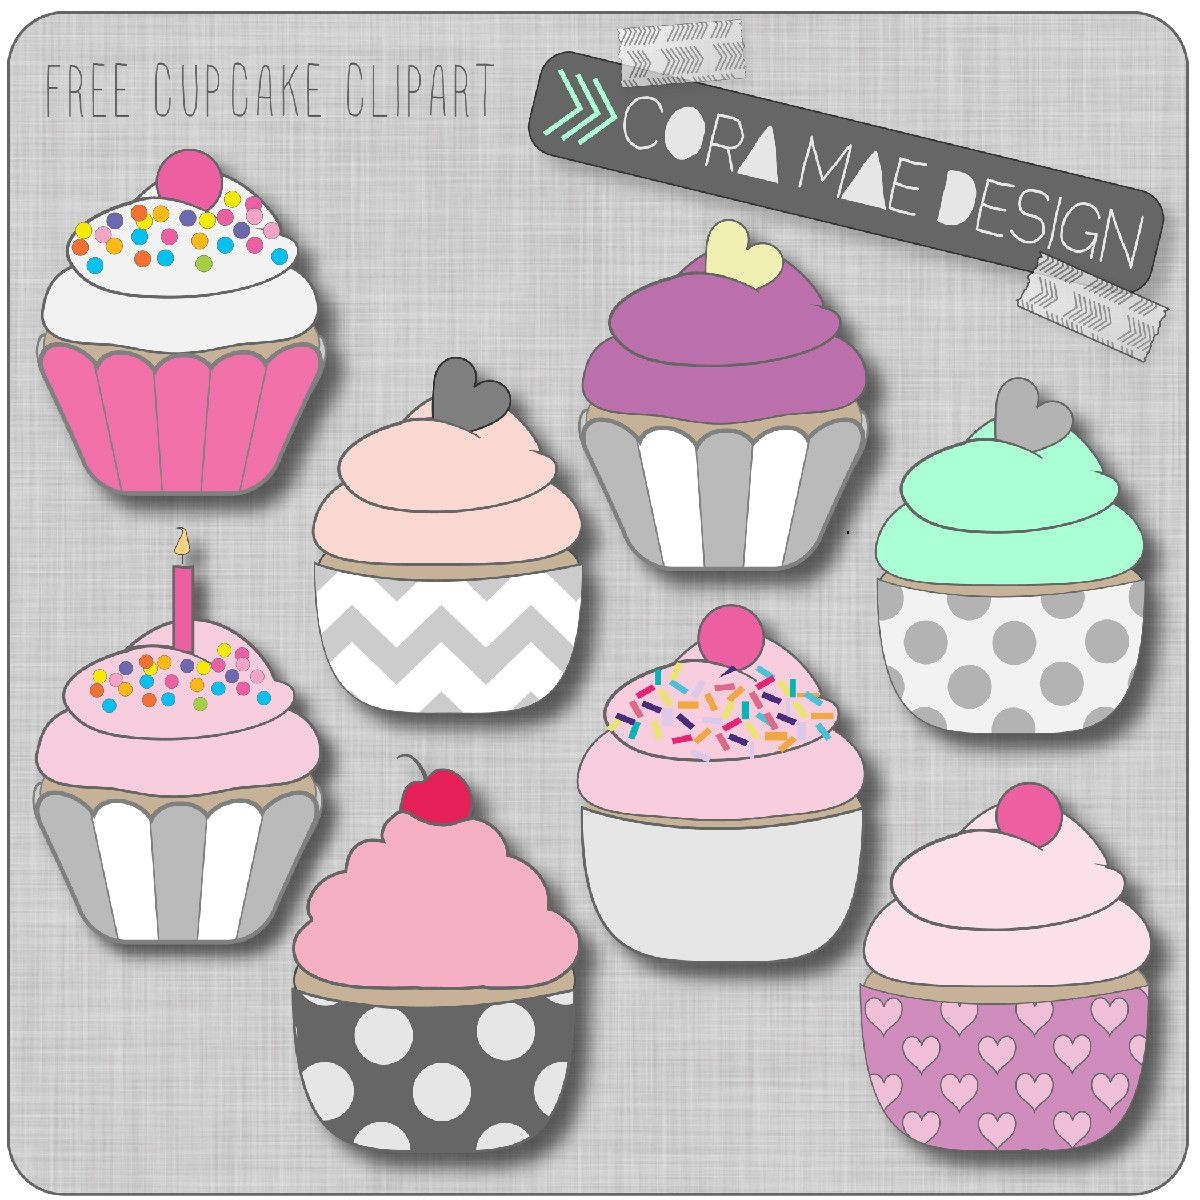 Free Printable Cupcake Clipart For Junk Journals, Art Journals Or - Free Printable Cupcake Clipart